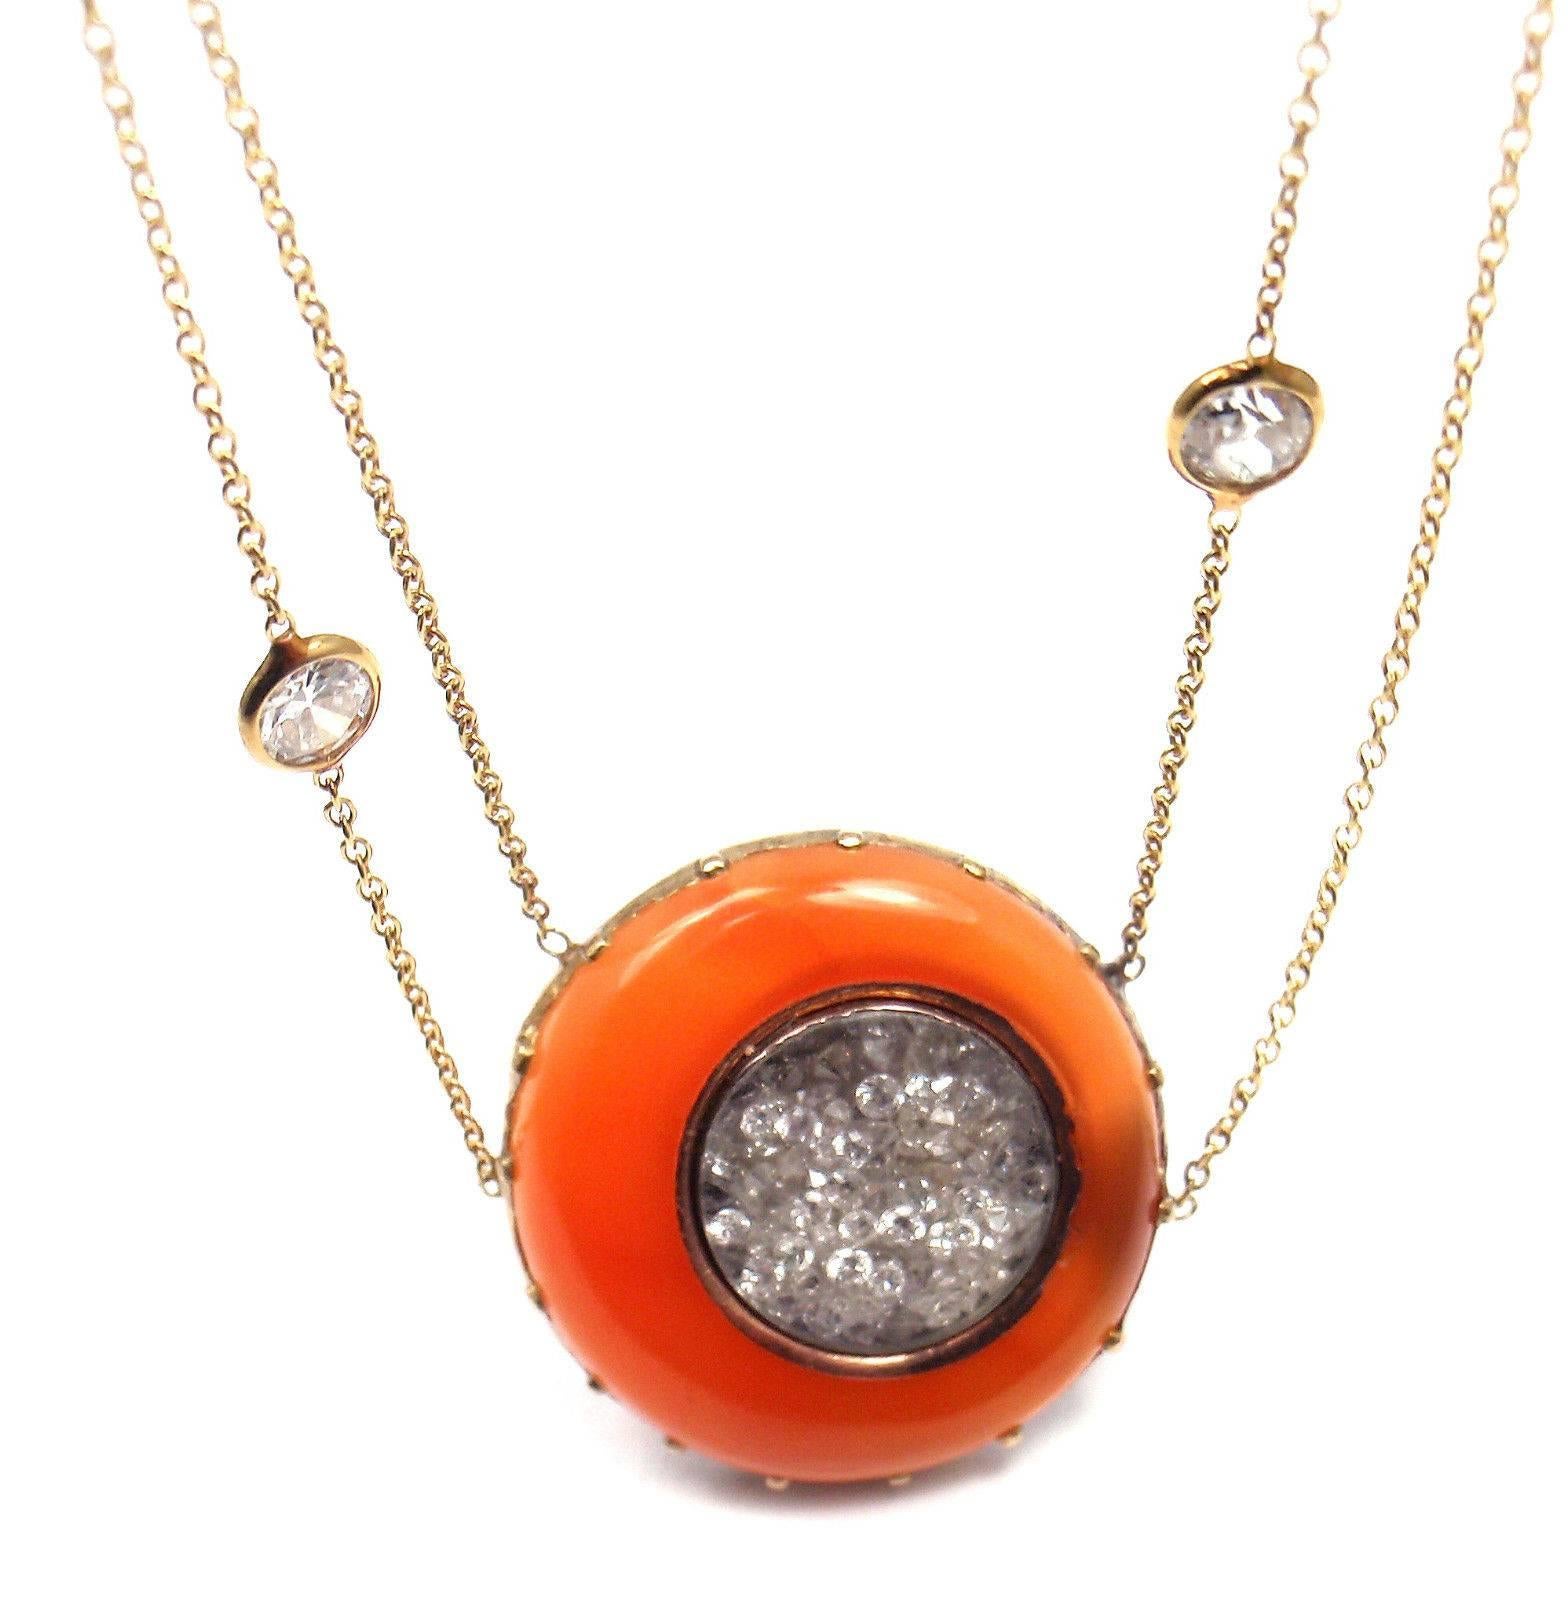 18k Yellow Gold Diamond And Carnelian Pendant Necklace by Renee Lewis.
With Diamonds VS2 clarity, G color total weight approx. 2.21ct
Carnelian

Details:
Necklace: 16'' inches long
Weight: 7.6 grams
Pendant: 23mm x 23mm
Stamped